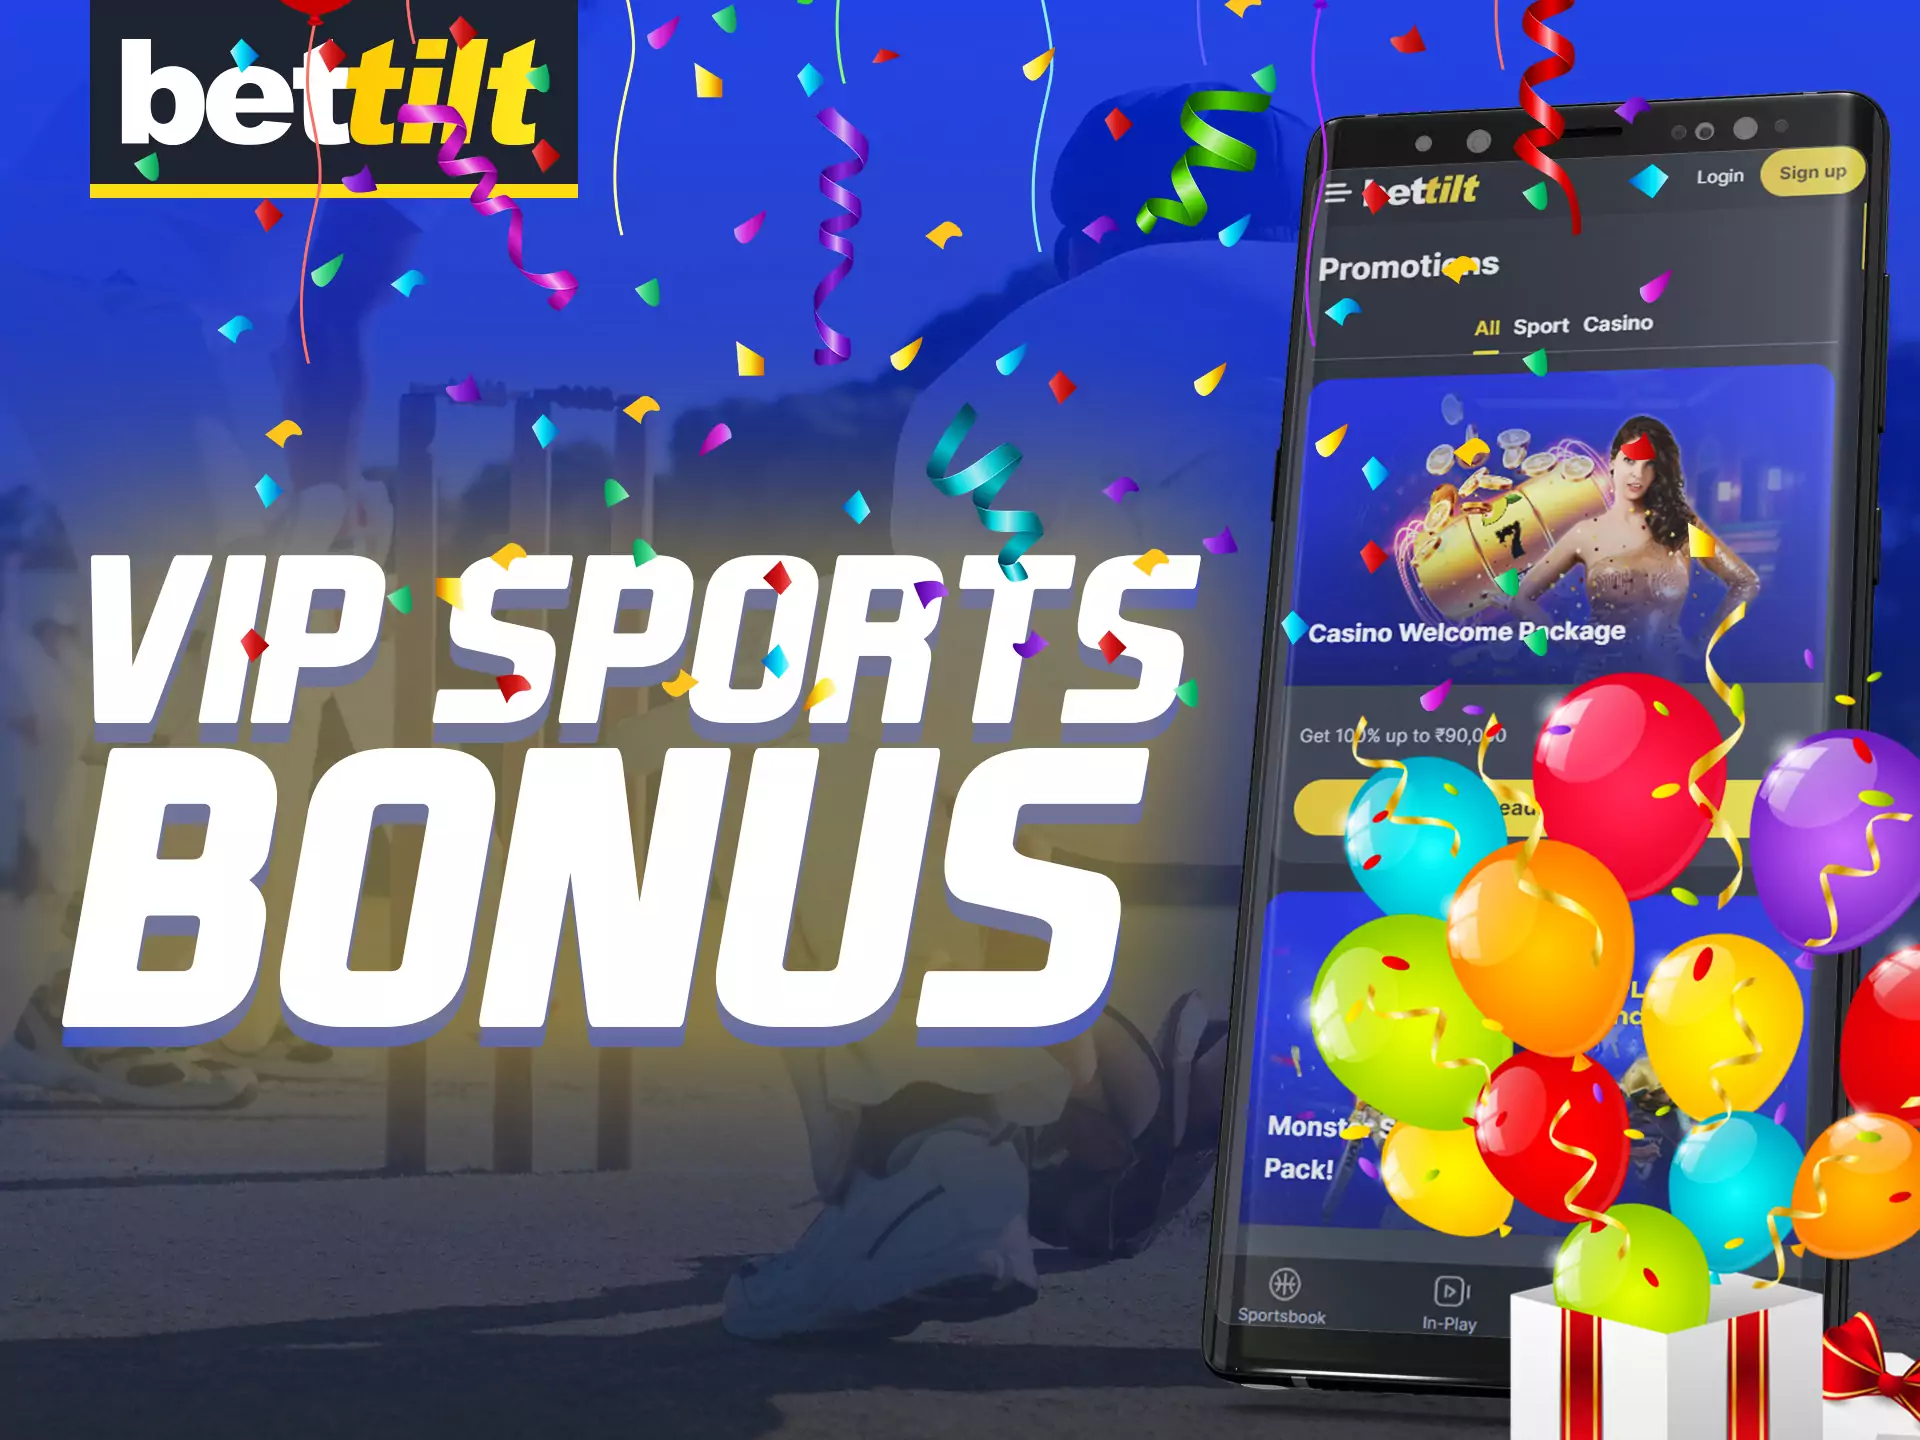 You can count on the VIP sports bonus of the Bettilt app.